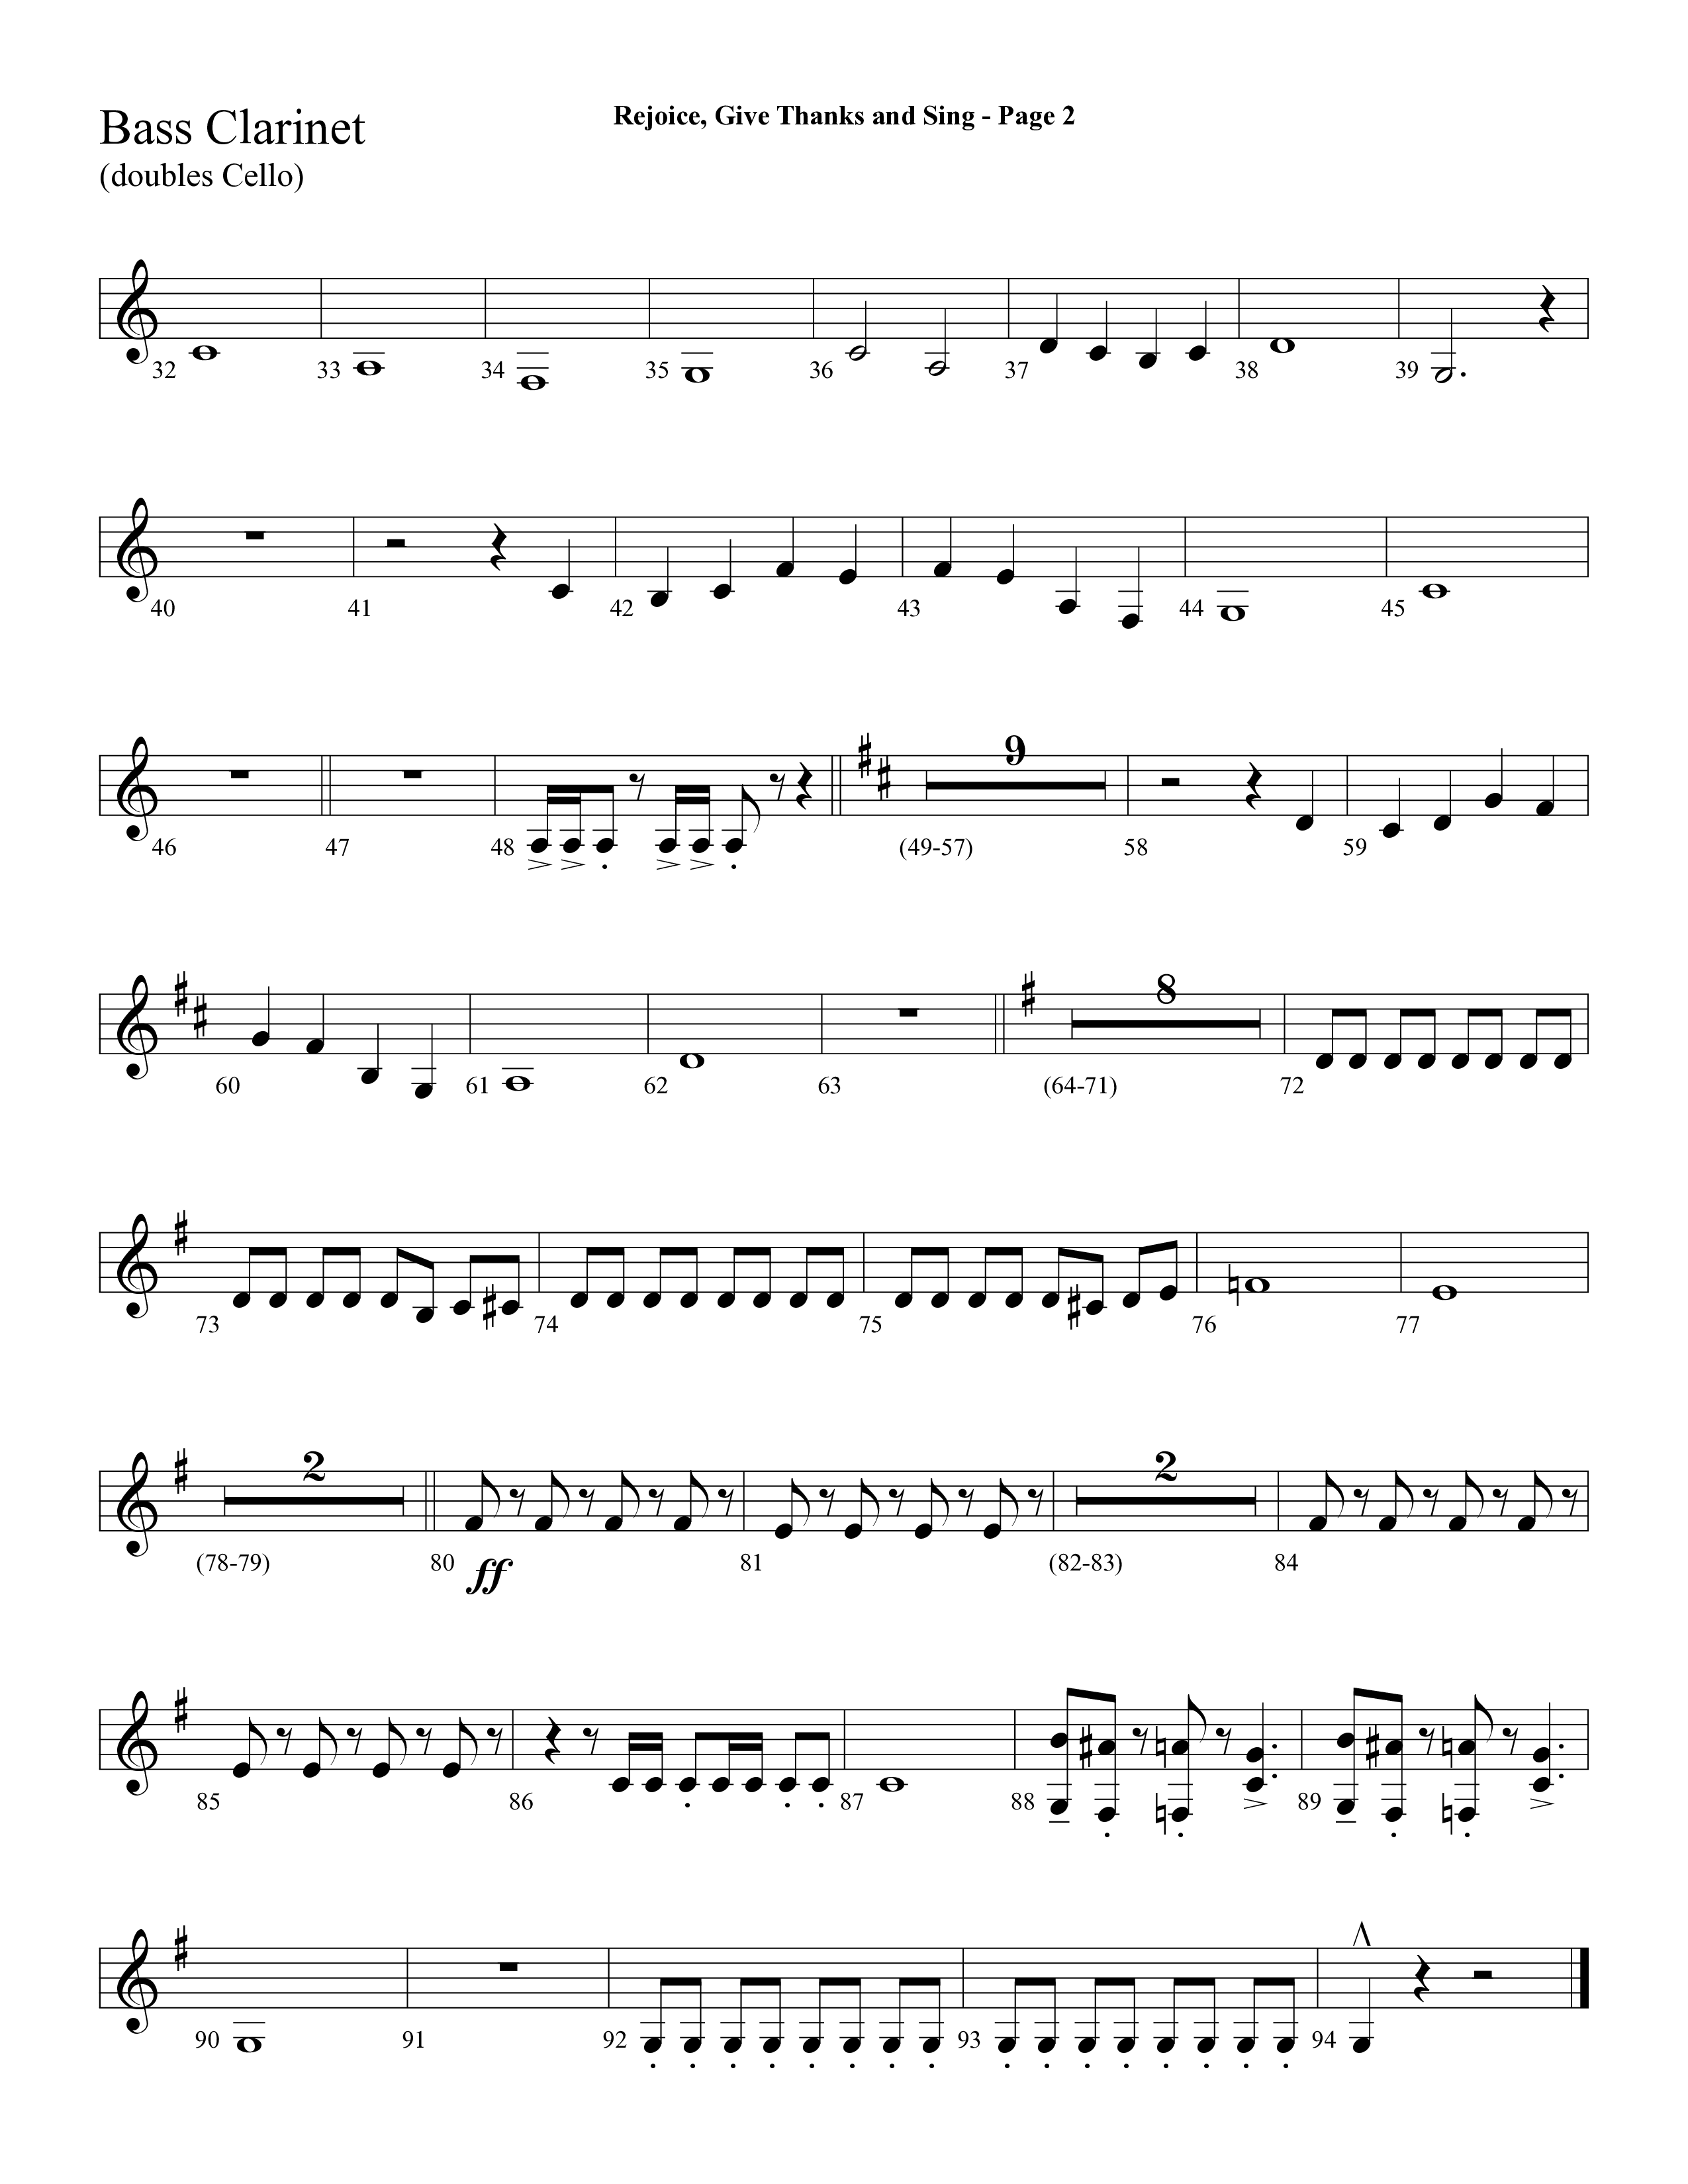 Rejoice, Give Thanks And Sing (with Rejoice, The Lord Is King, Come, Thou Almighty King) (Choral Anthem SATB) Bass Clarinet (Lifeway Choral / Arr. Dave Williamson)